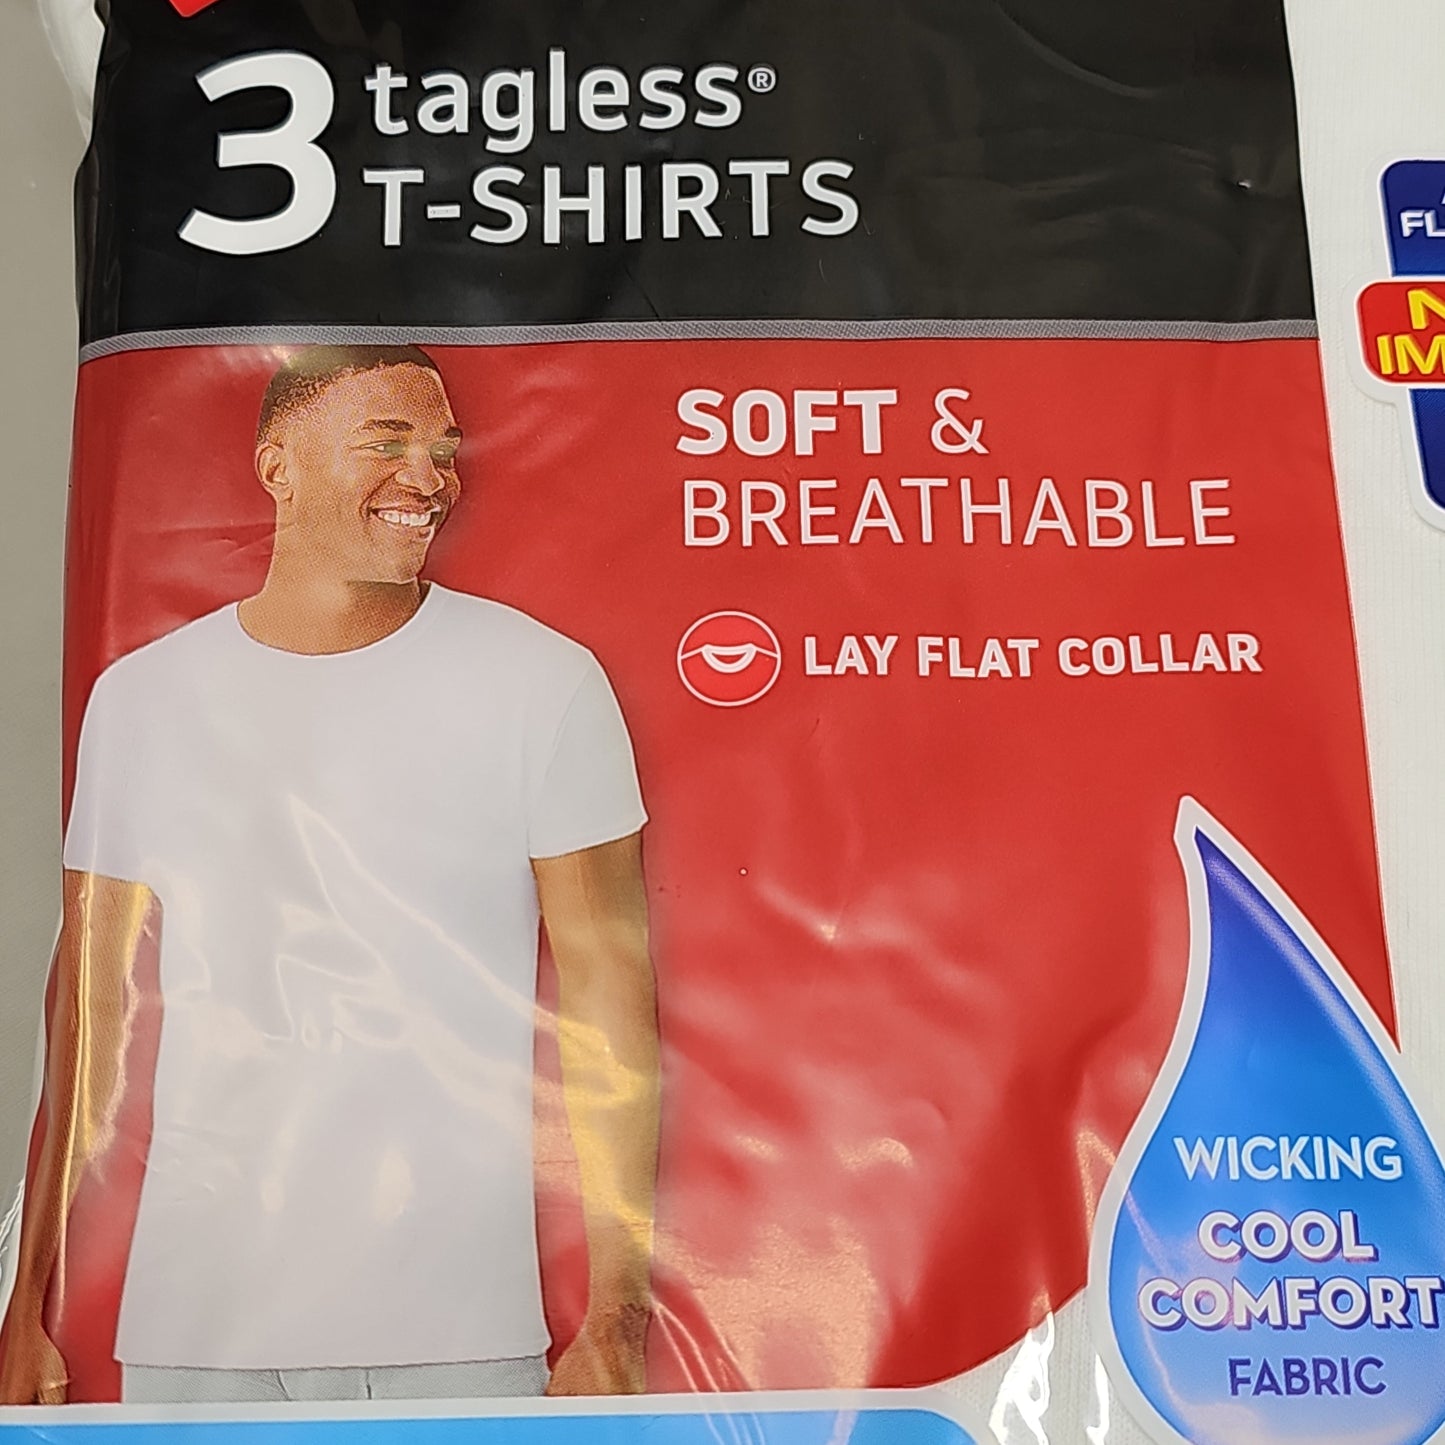 HANES Tagless T-Shirts Pack of 12 Men's Size S 34-36" White #2135 (New)